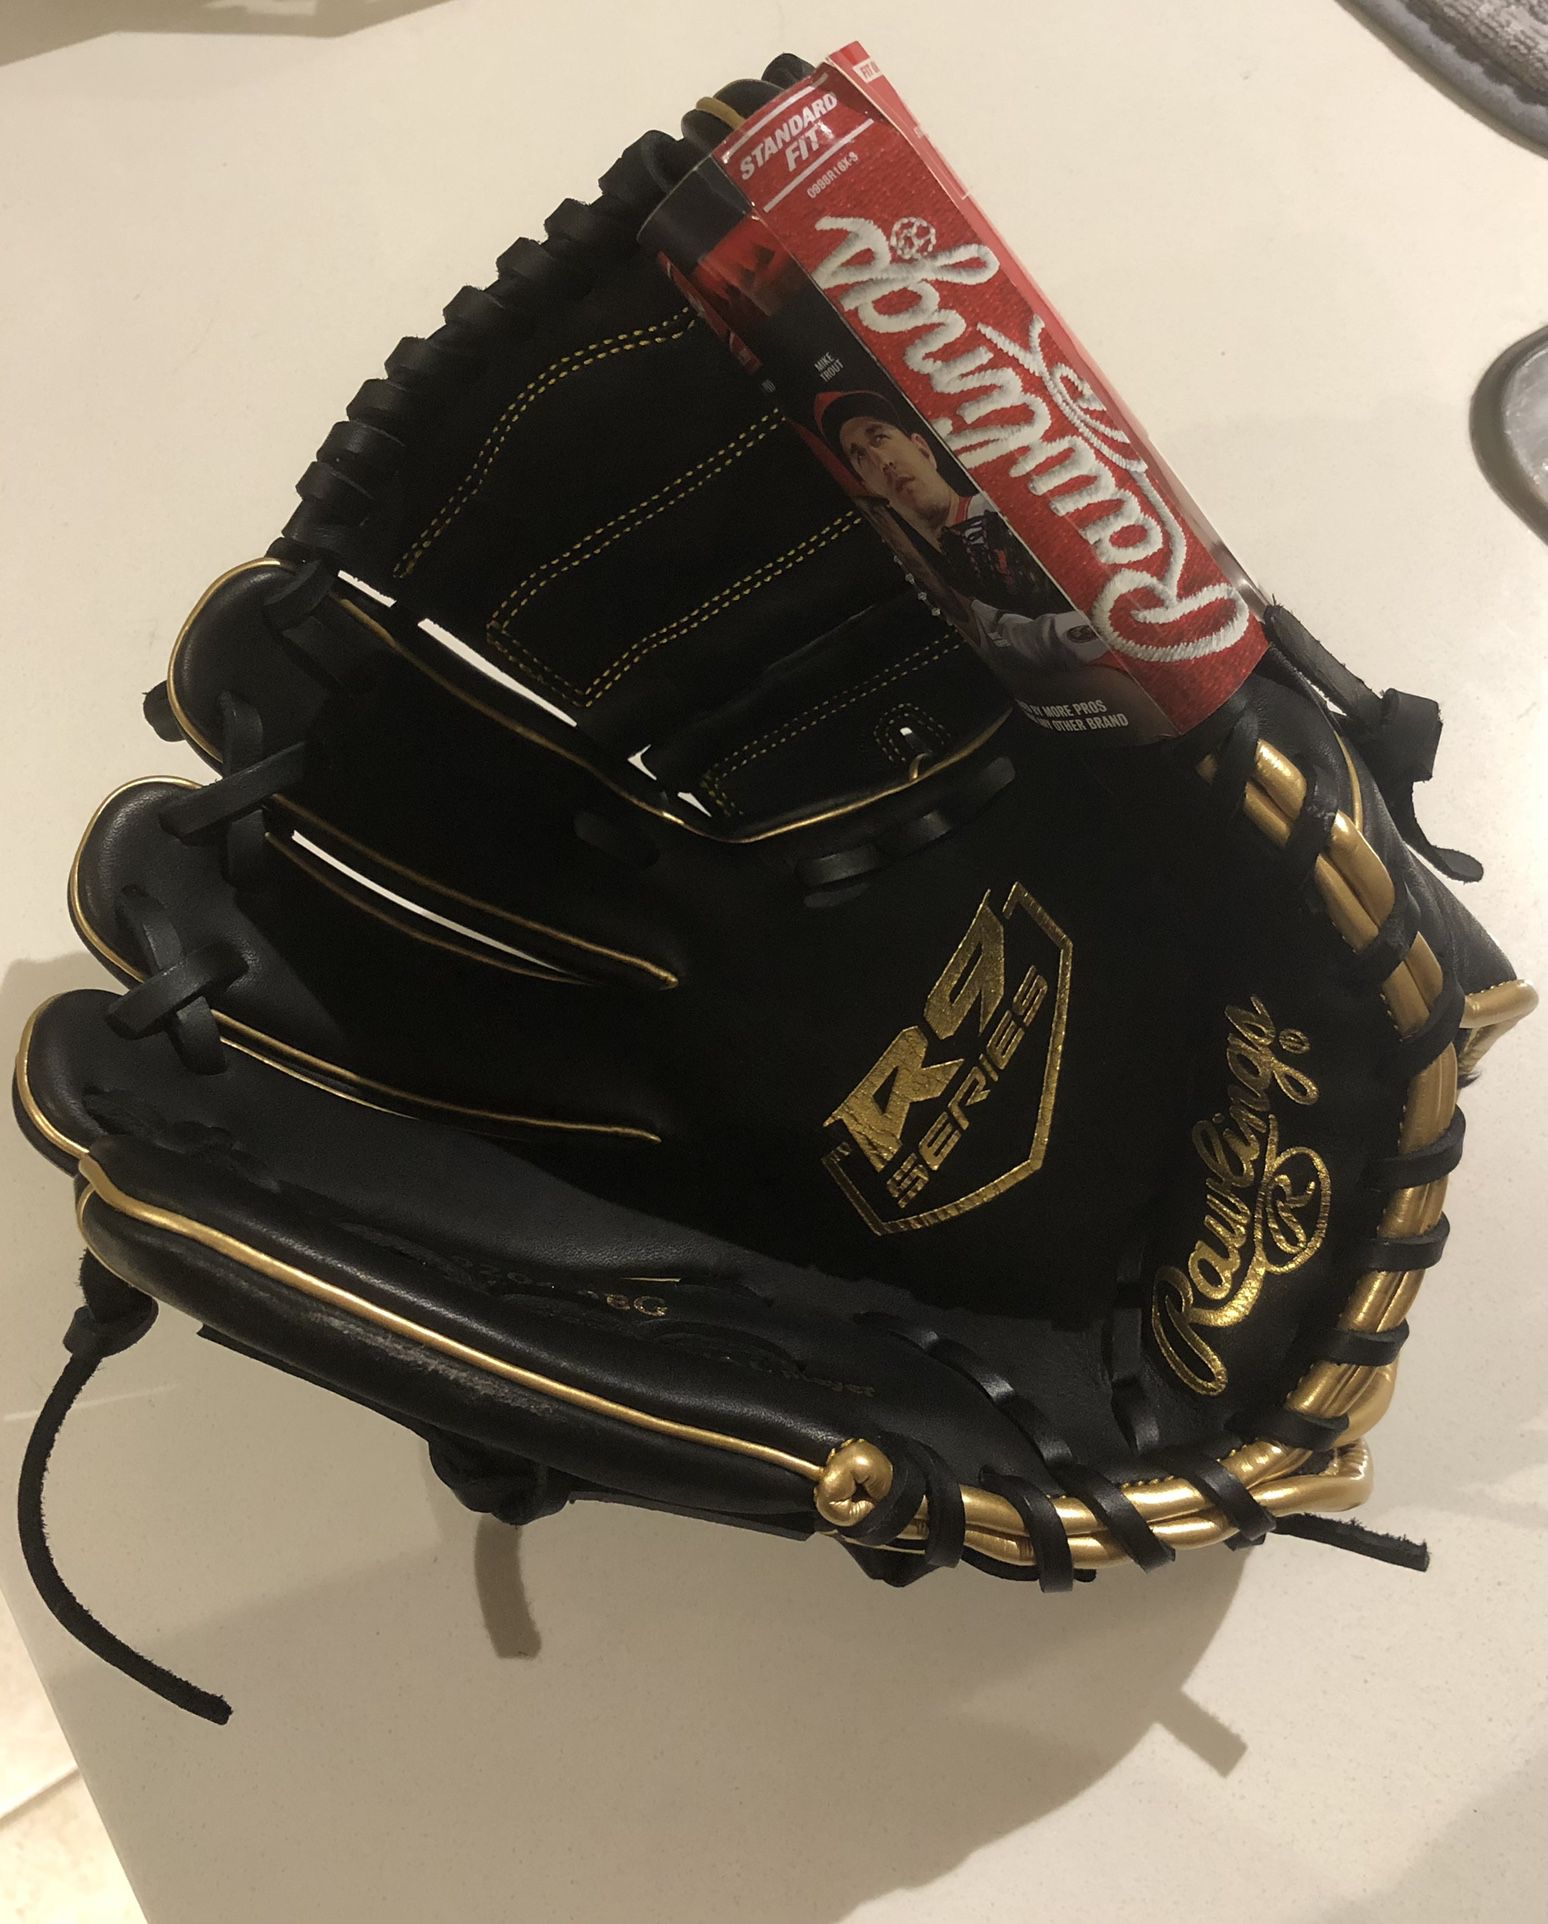 Rawlings Left handed  12” Pitchers Glove